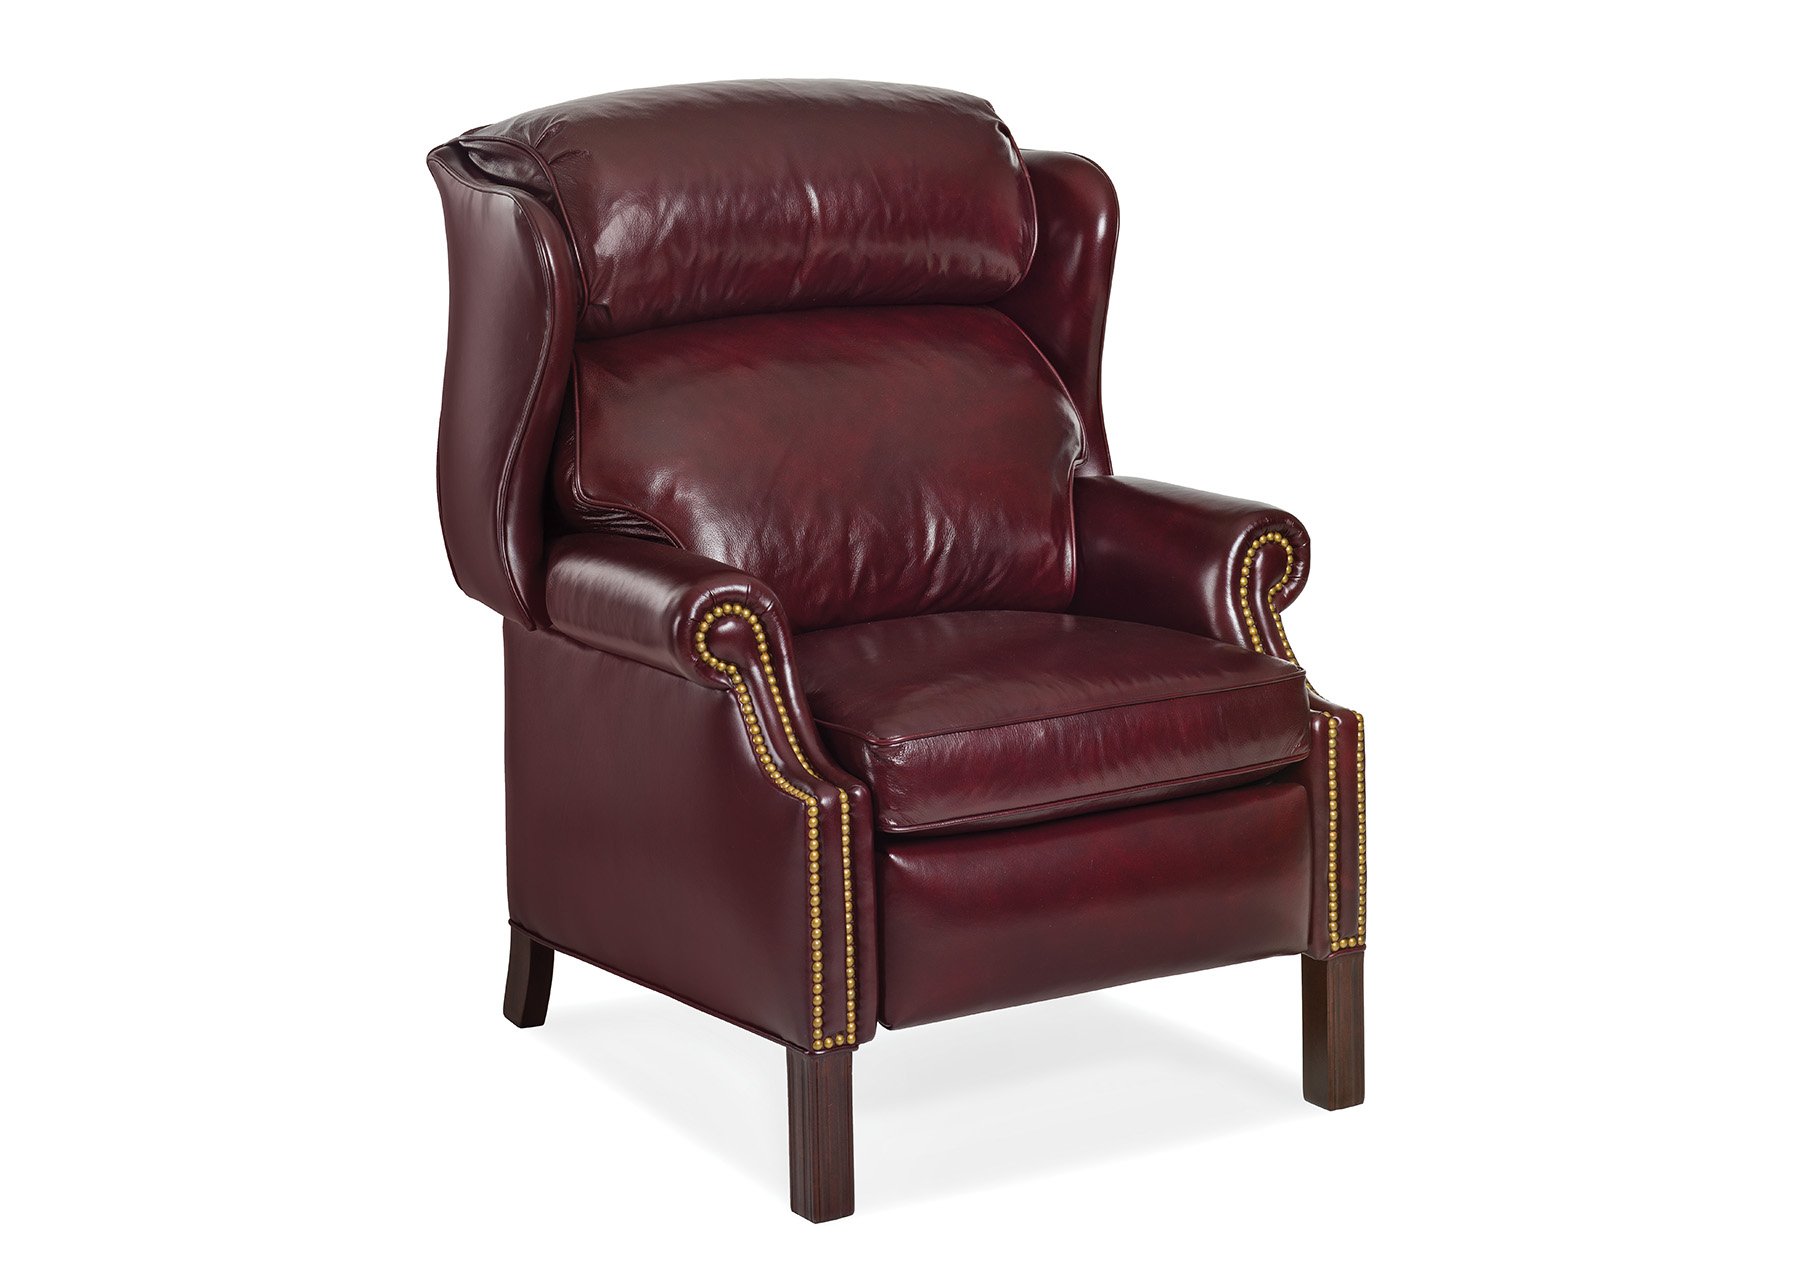 WOODBRIDGE CHIPPENDALE WING CHAIR RECLINER